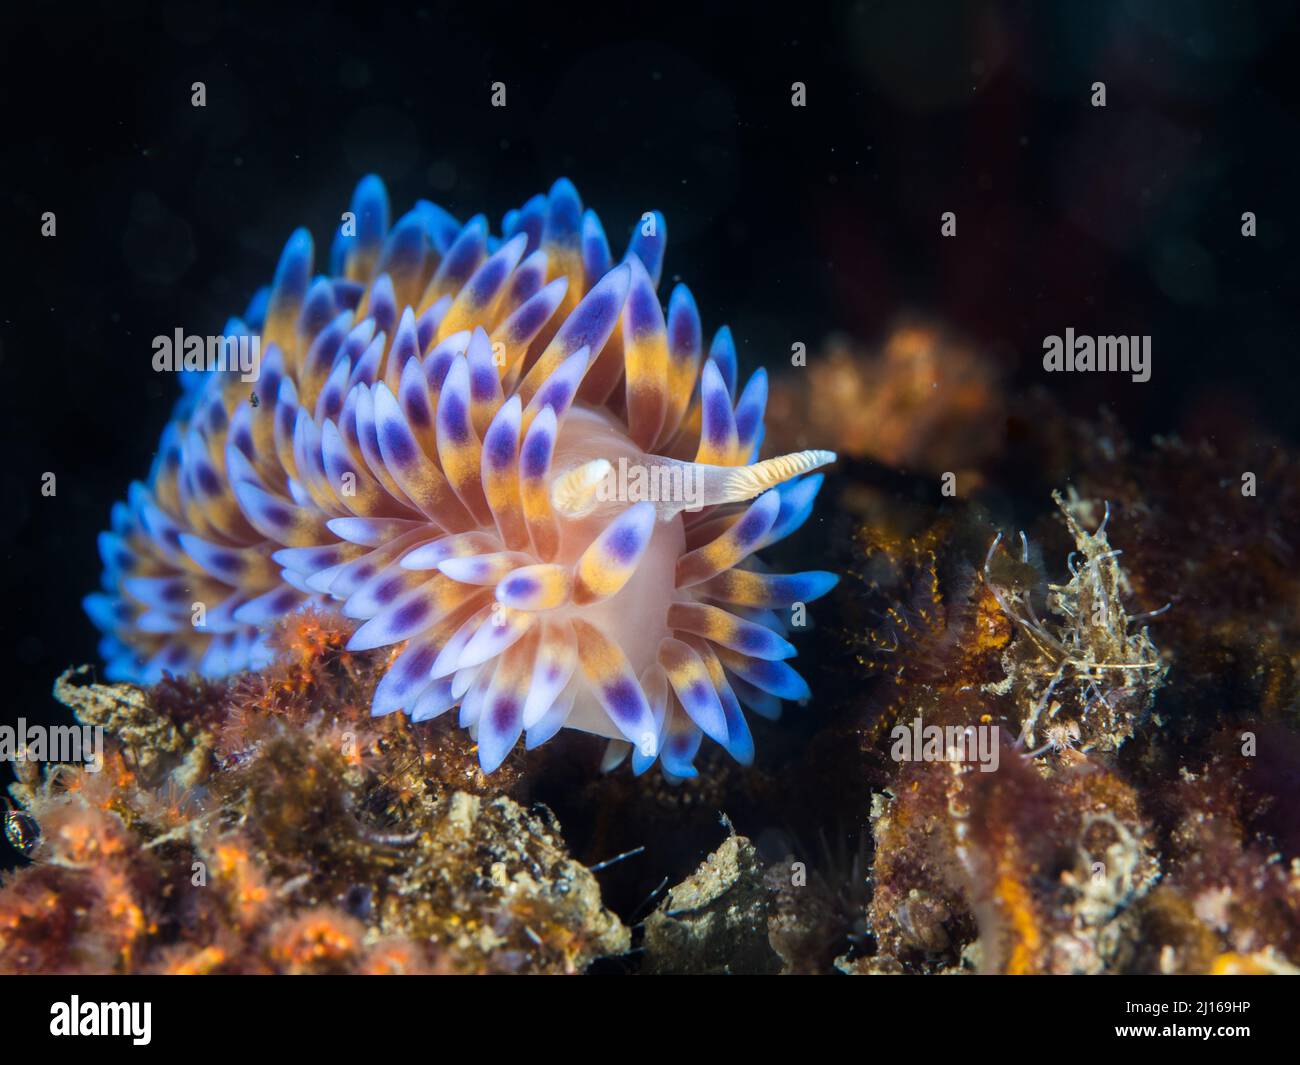 Gas flame nudibranch (Bonisa nakaza) underwater facing the camera, sea slug covered with yellow cerata with blue tips Stock Photo